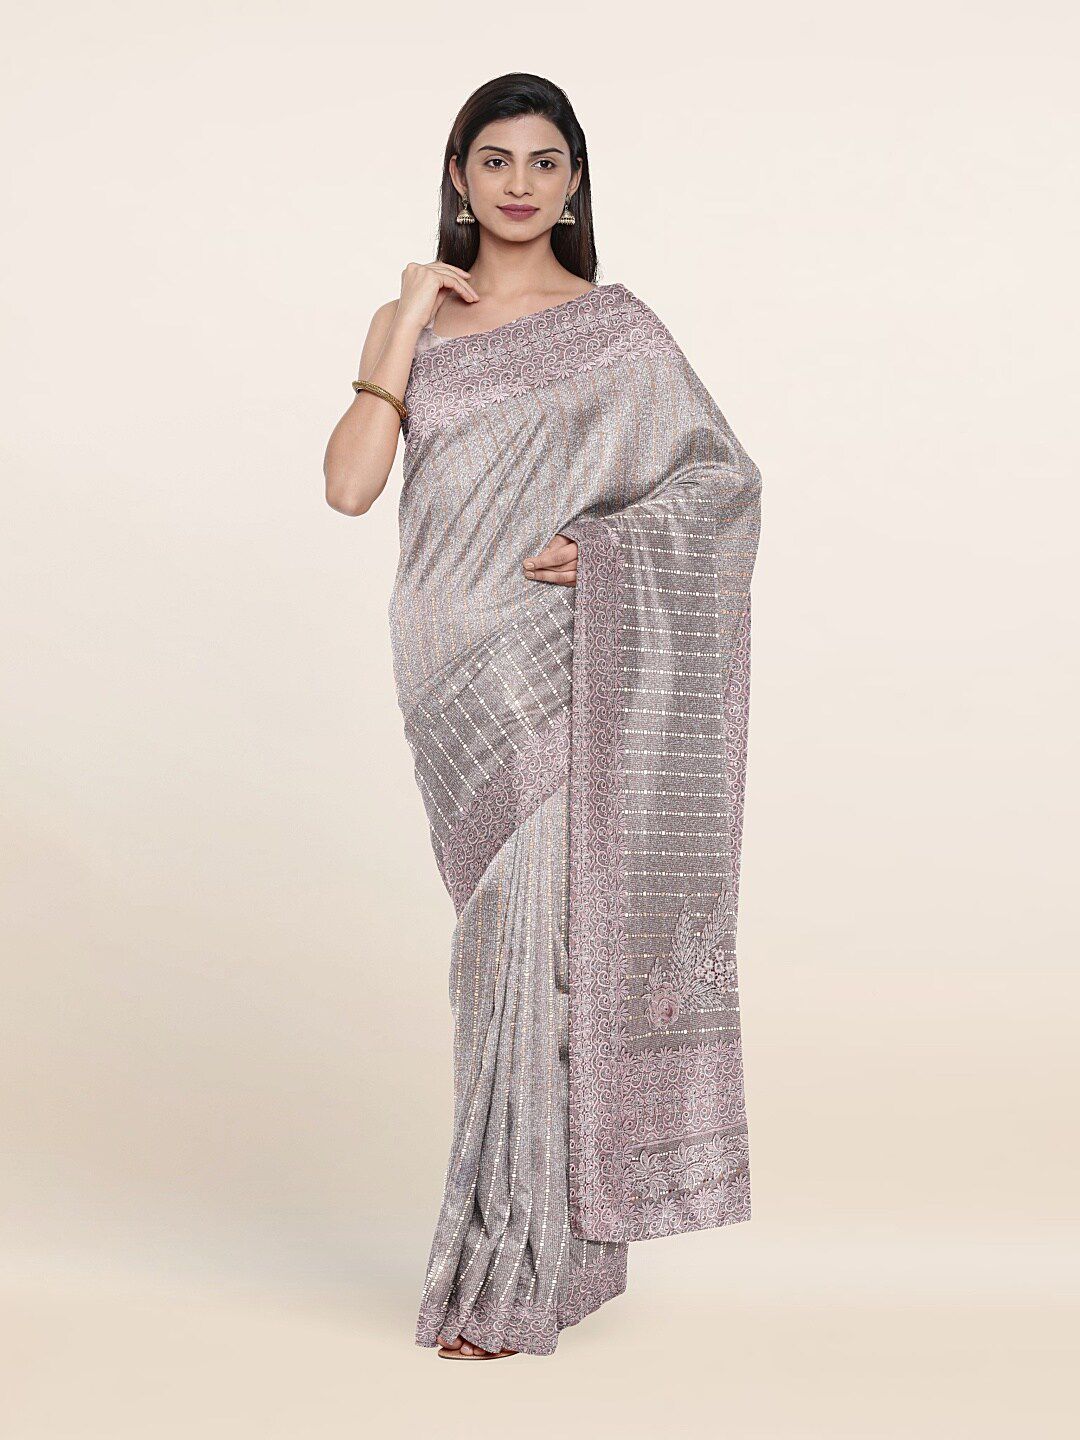 Pothys Pink & White Embellished Beads and Stones Saree Price in India